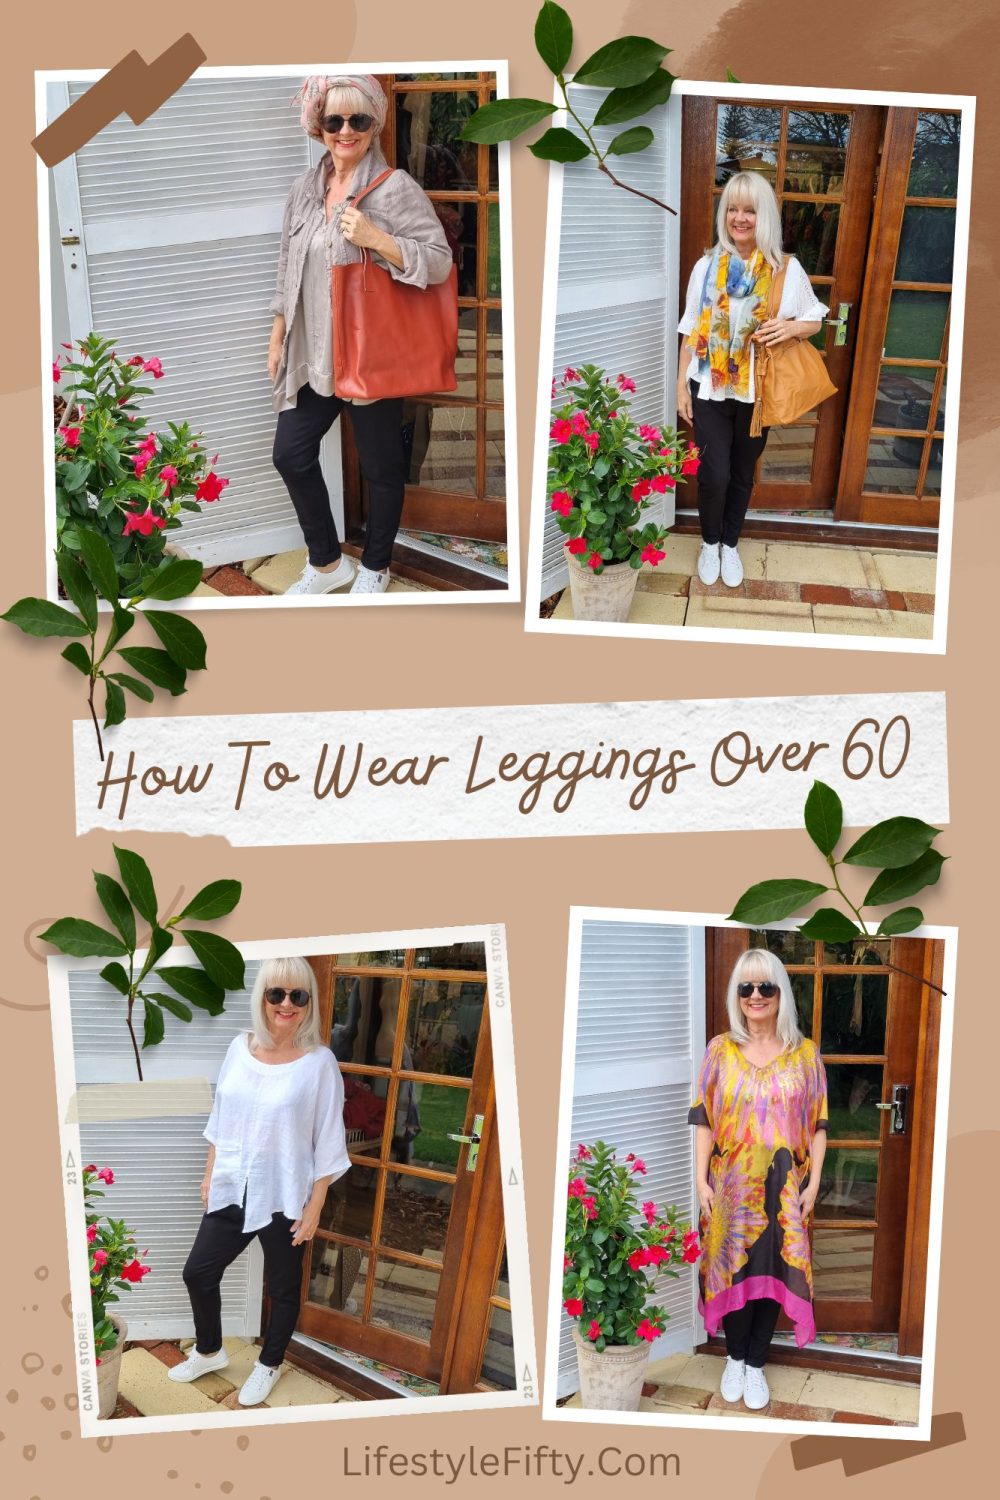 Images of a woman aged over 60 years old, showing how to wear leggings over 60. She is wearing various different outfits.